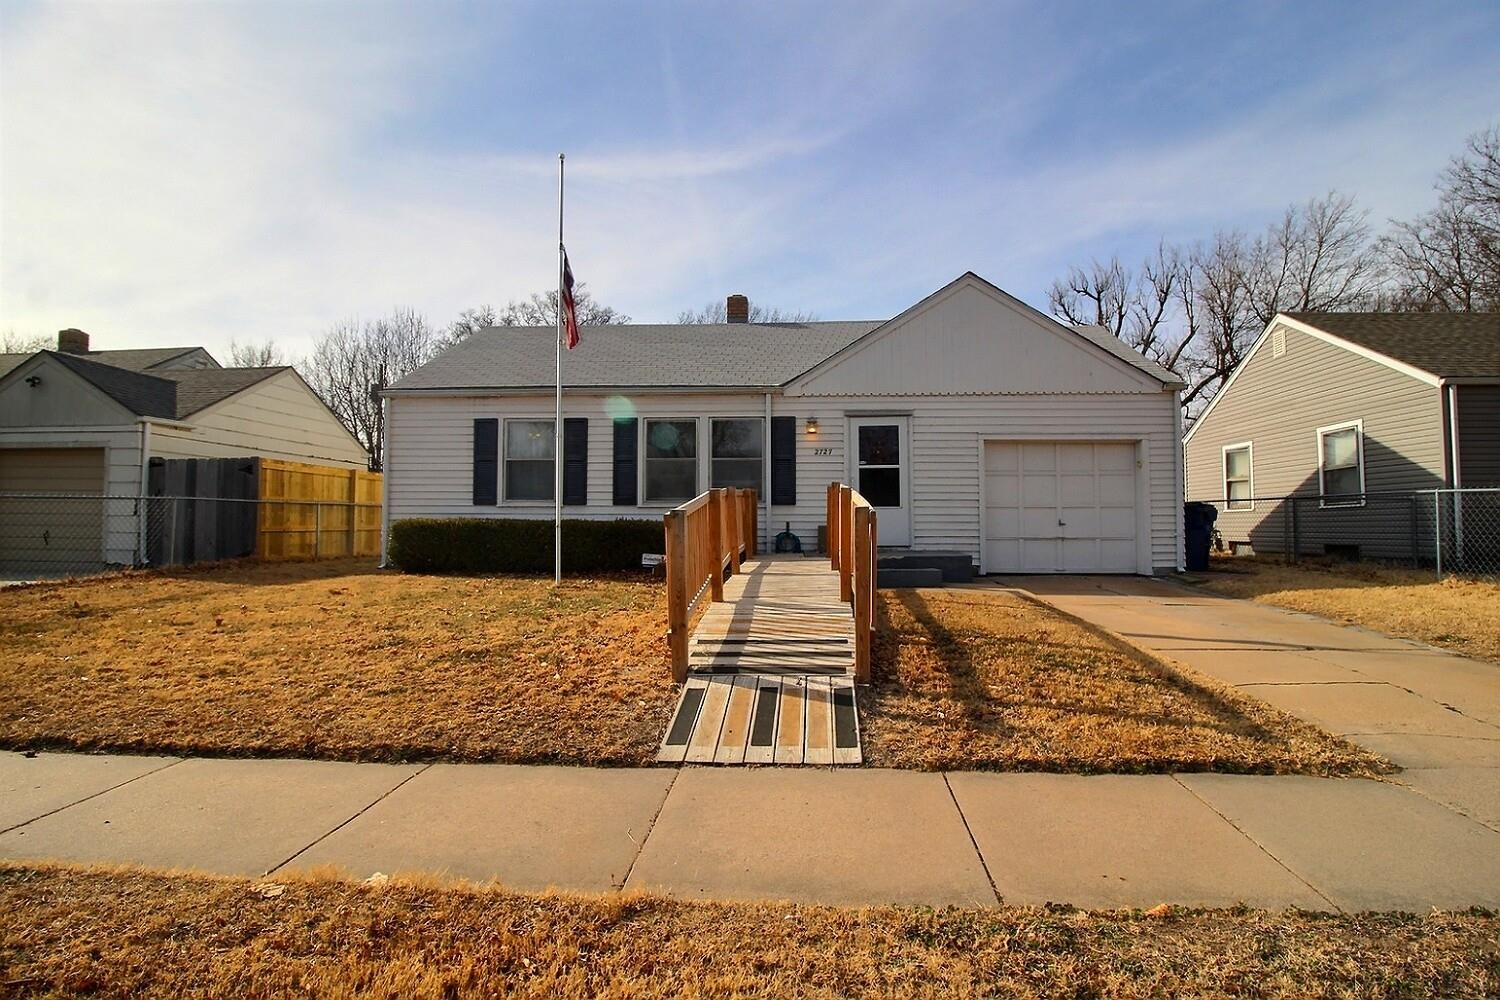 Don’t miss this adorable and well-maintained ranch located in south Wichita featuring 2 bedrooms and